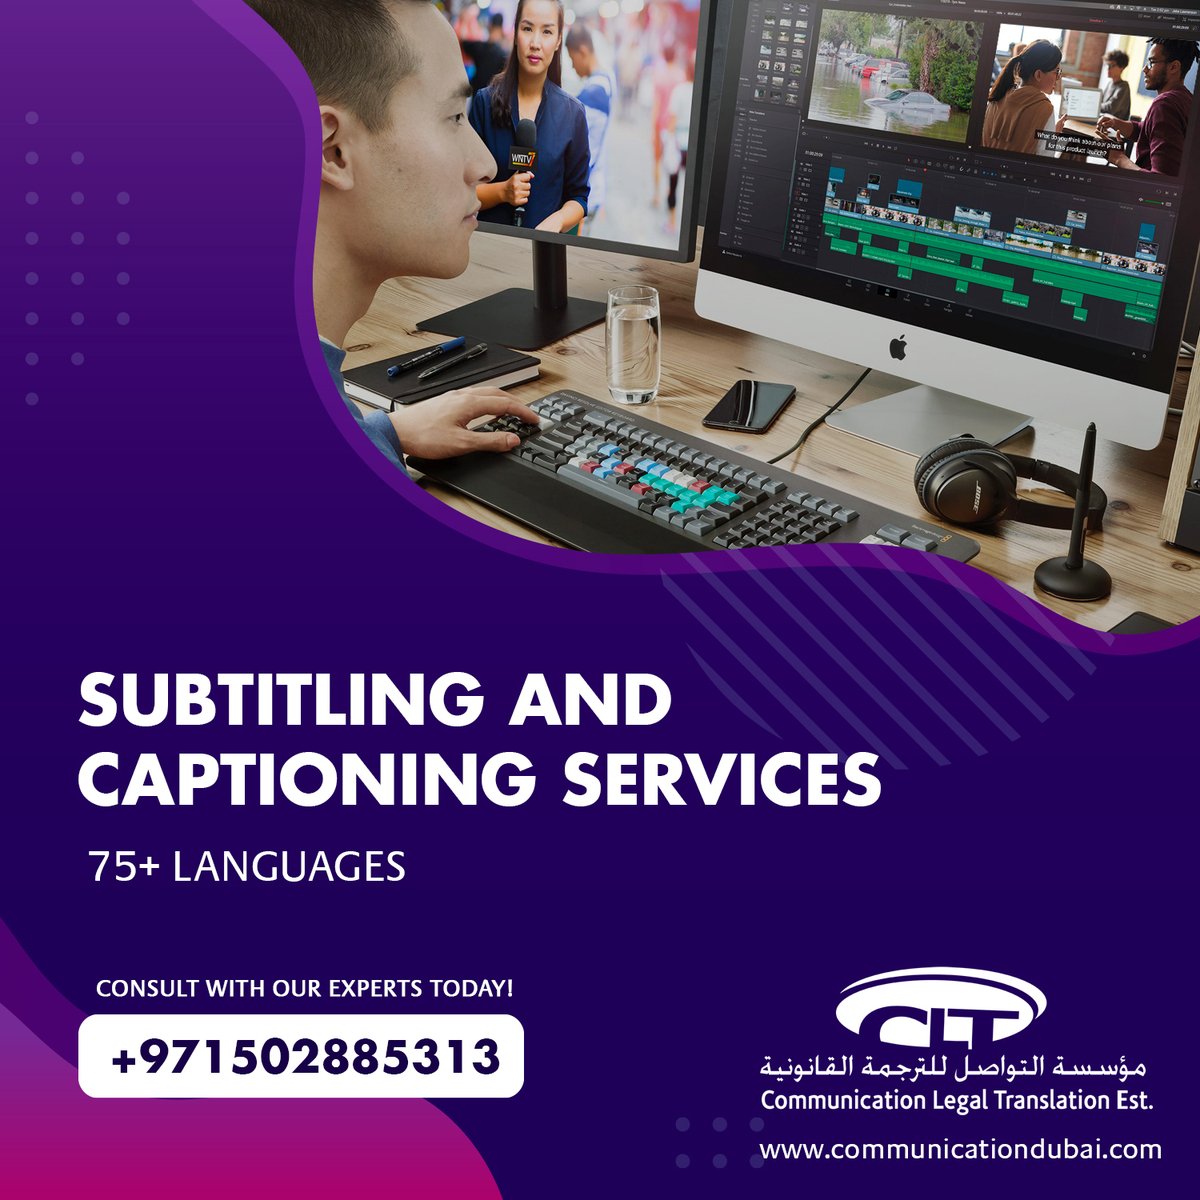 Subtitling and Captioning Services 
75+ Languages    

For More Information Please Visit Our Website
Call / WhatsApp: +971 502885313 
bit.ly/2Tv12nr

#subtitling #translation #n #languages #translationservices #translator